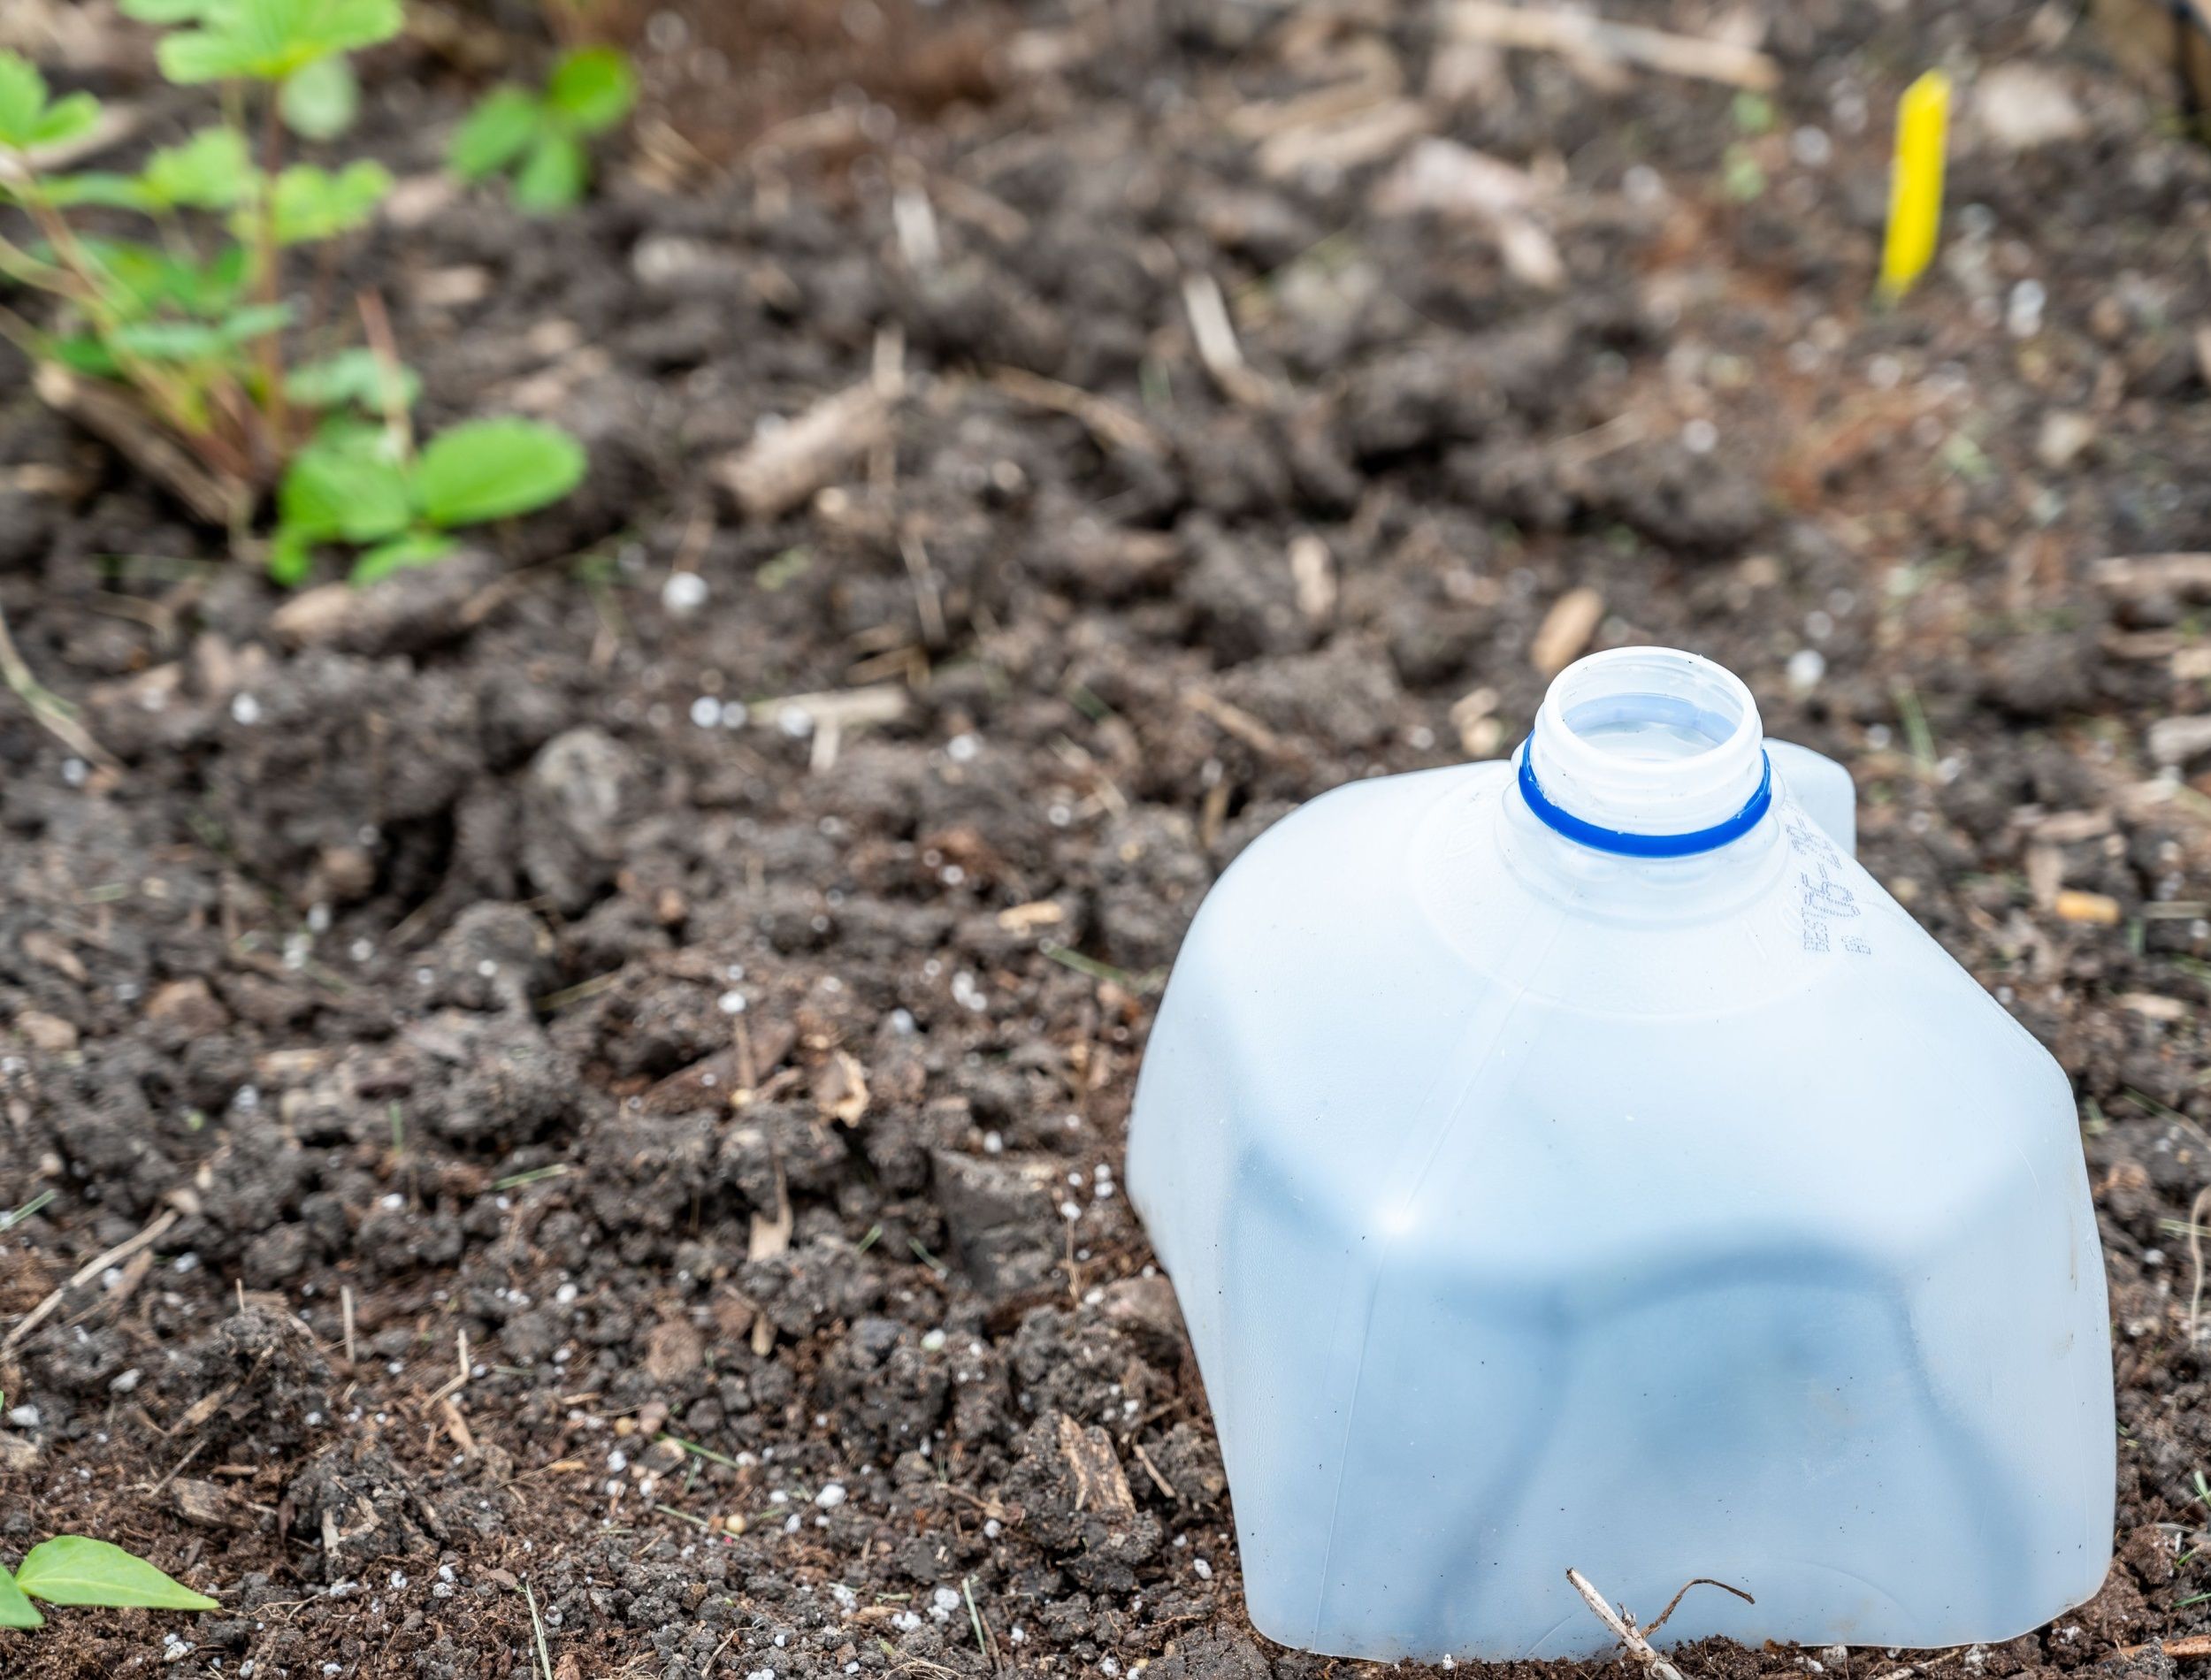 Plastic milk jug cut in half to cover garden plants to protect from pests